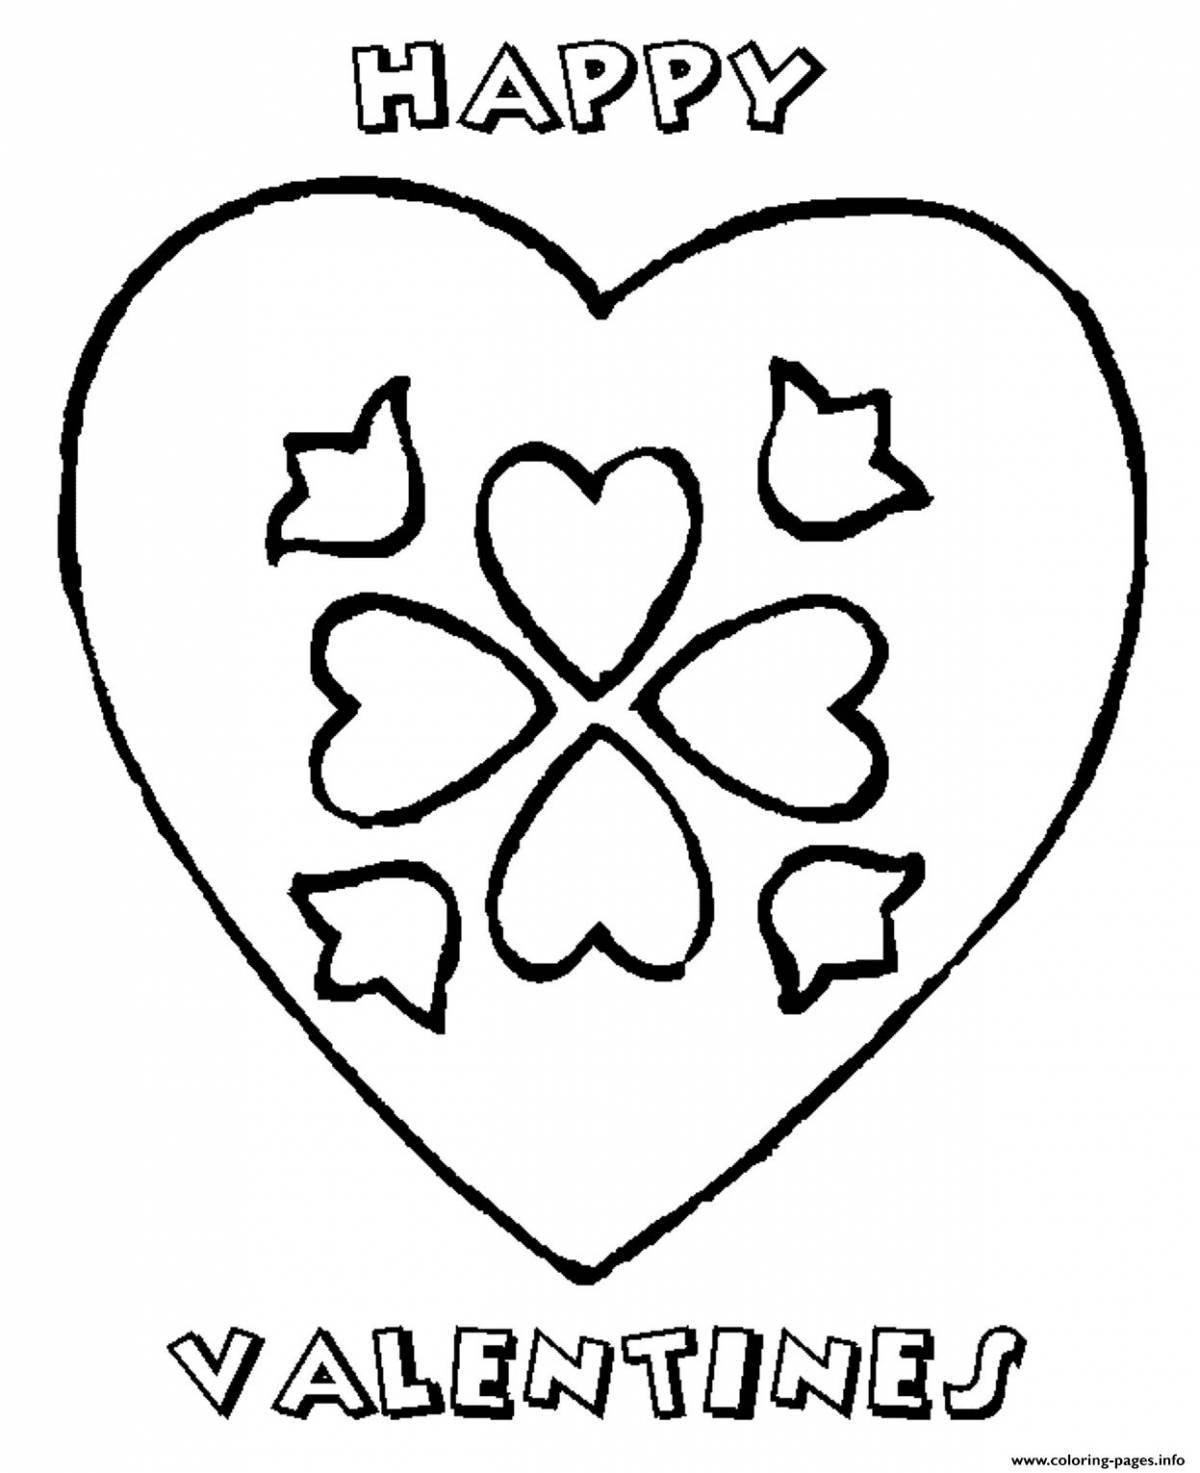 Adorable coloring pages with hearts